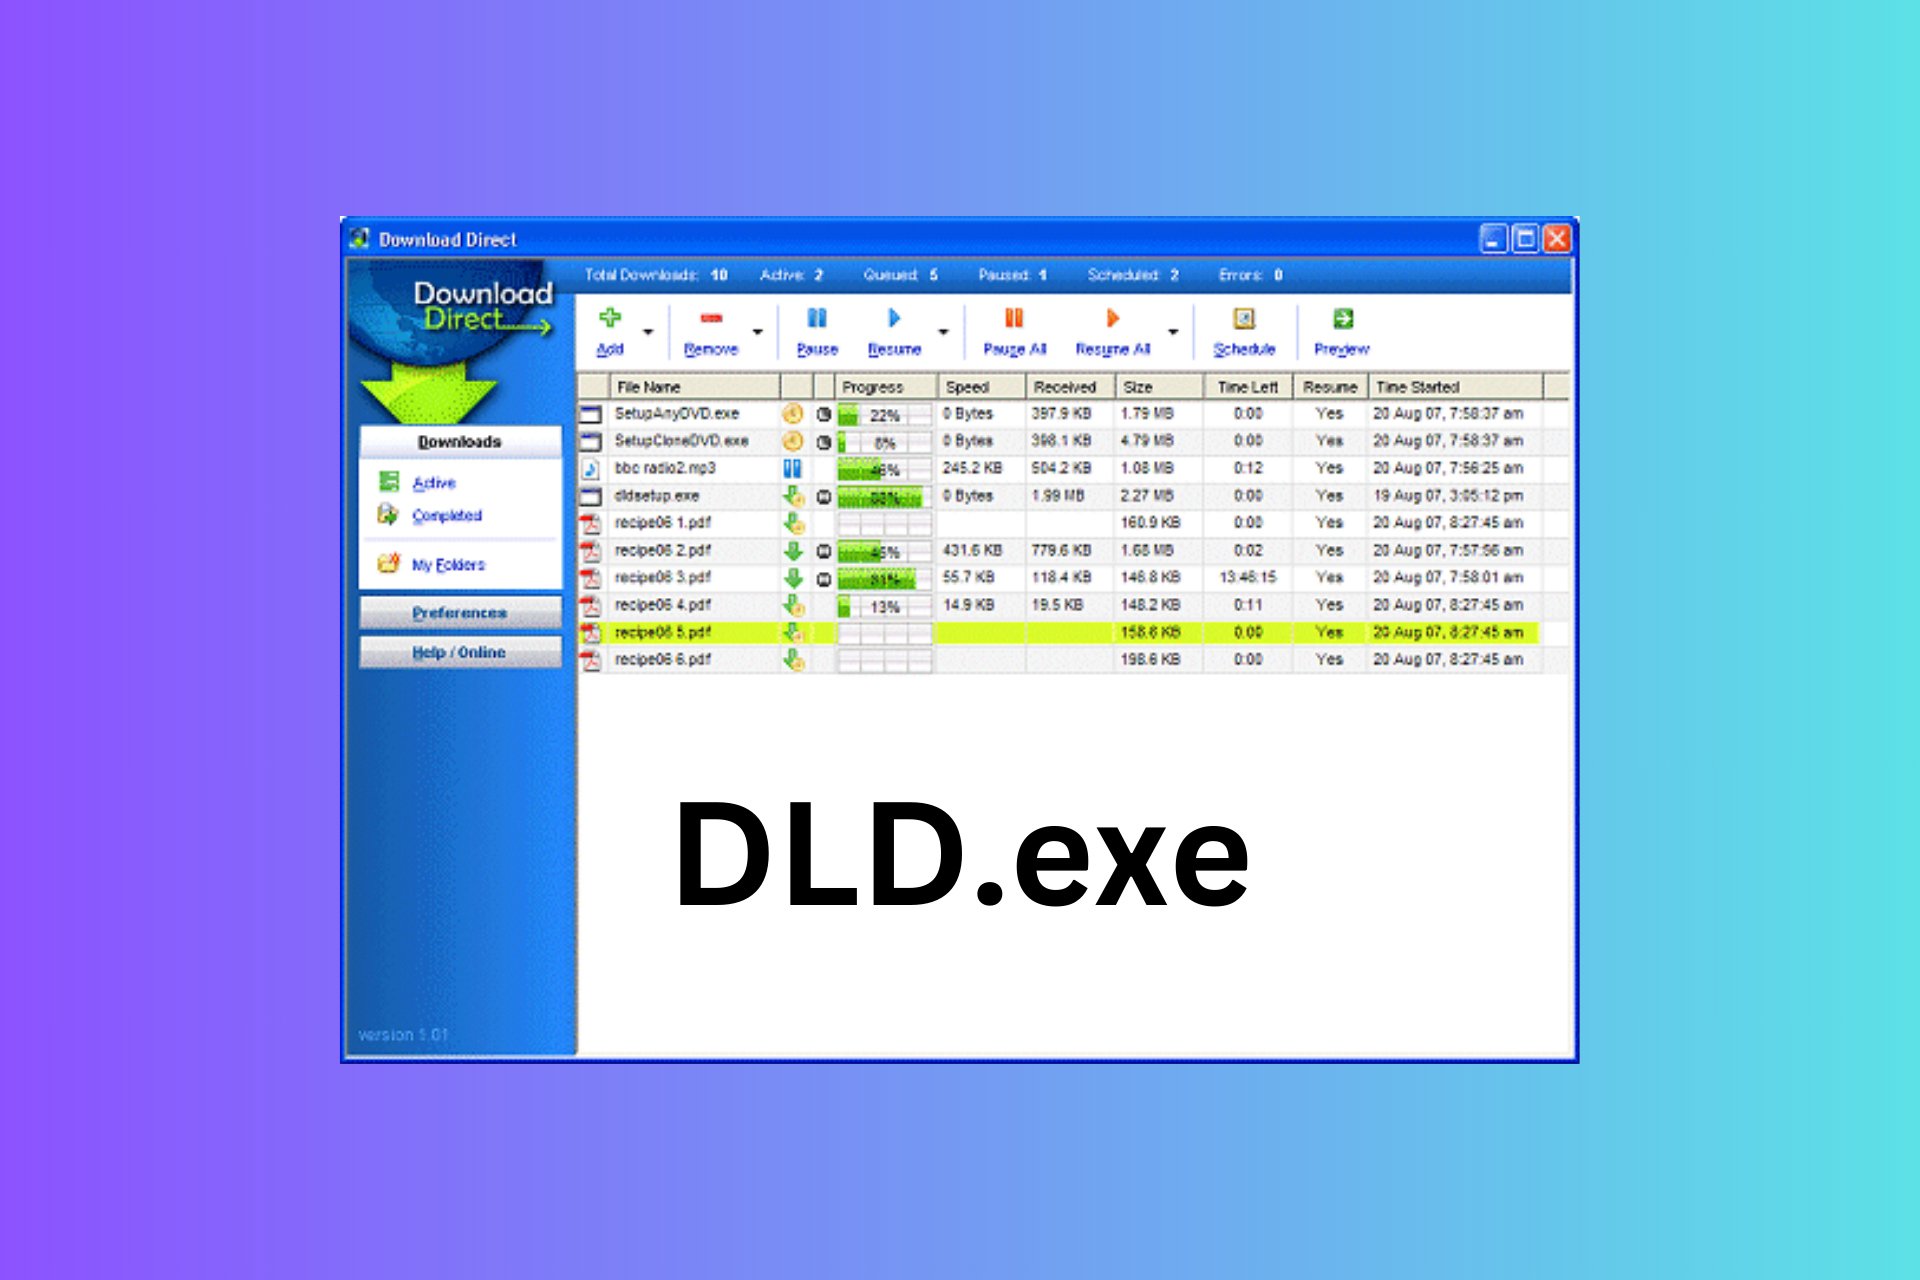 Is Dld.exe safe?